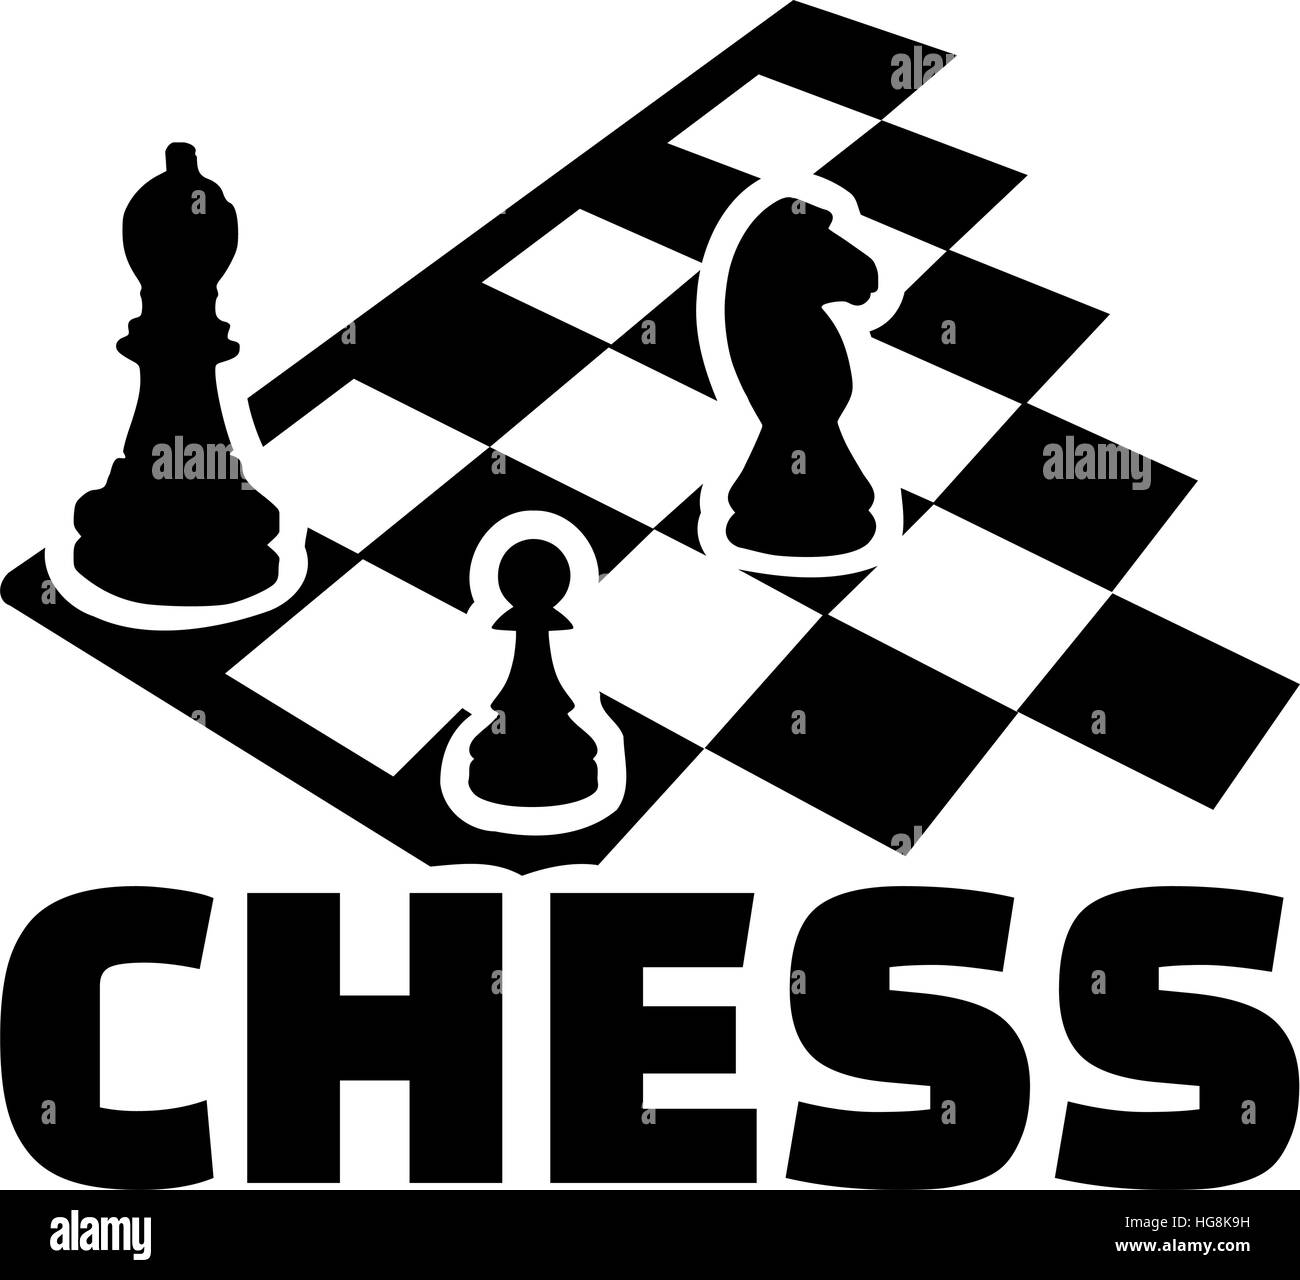 Pawn - Chess Terms 